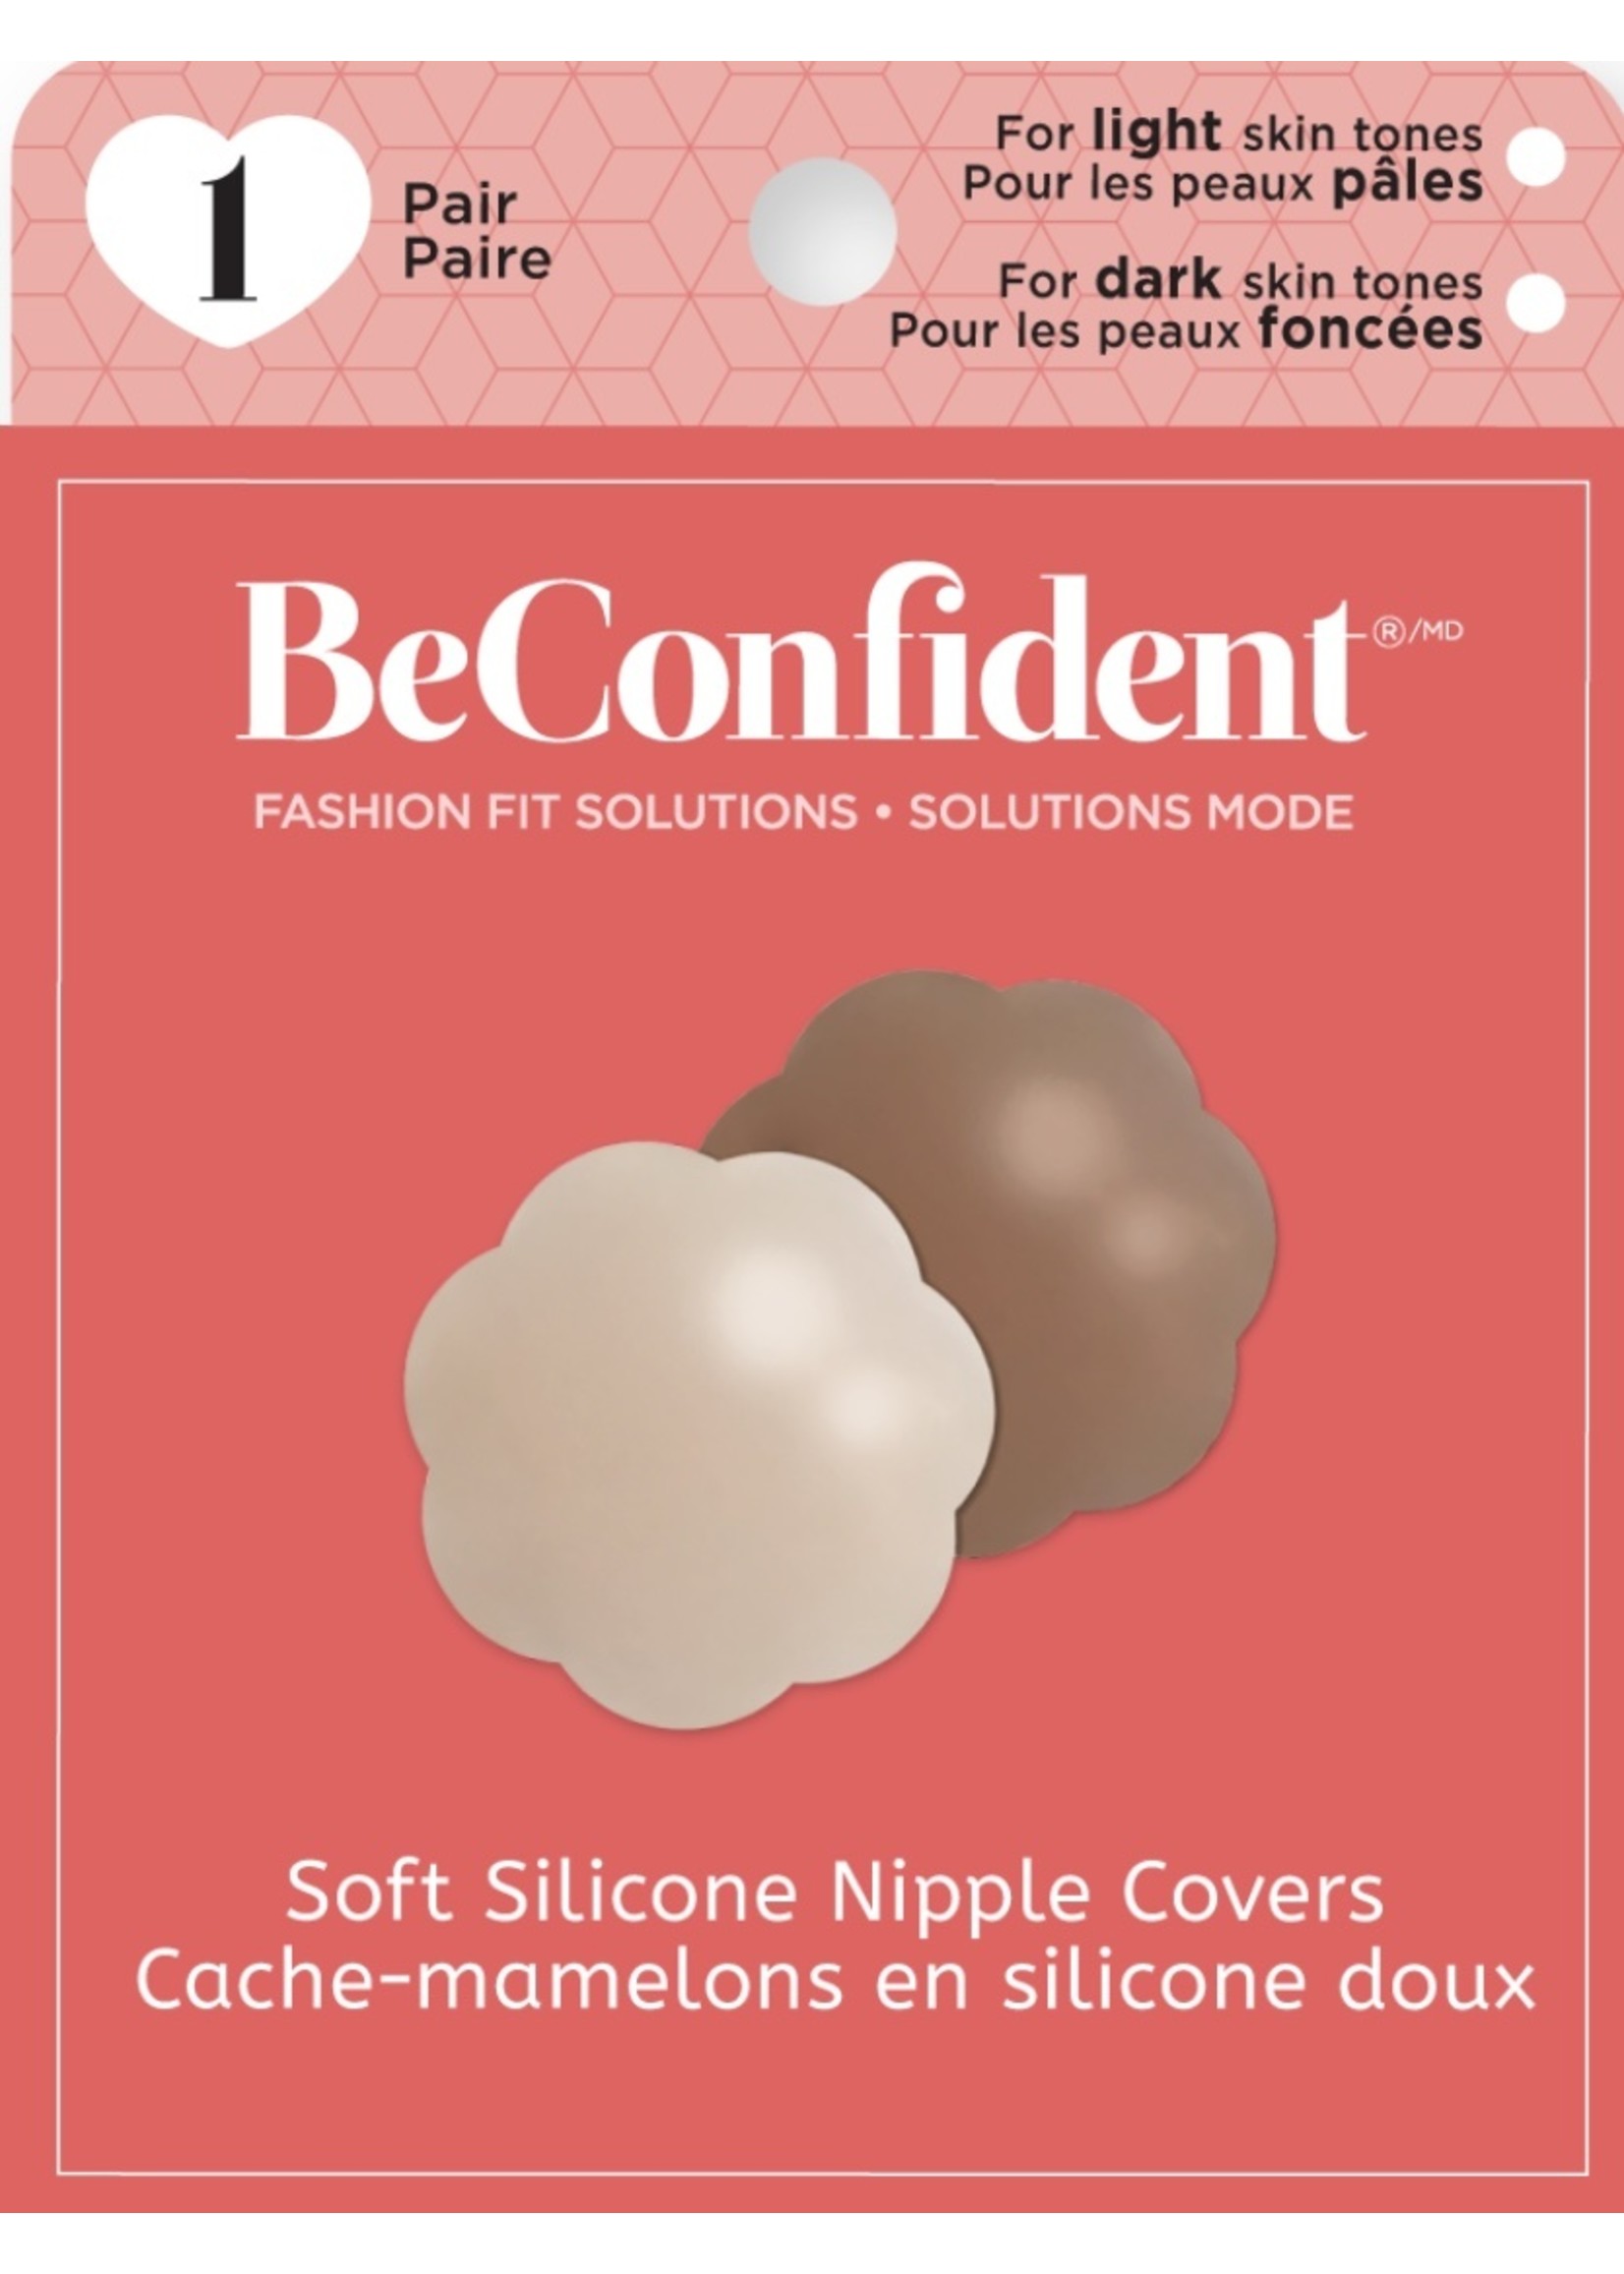 Be Confident SOFT SILICONE NIPPLE COVERS - 1 PAIR